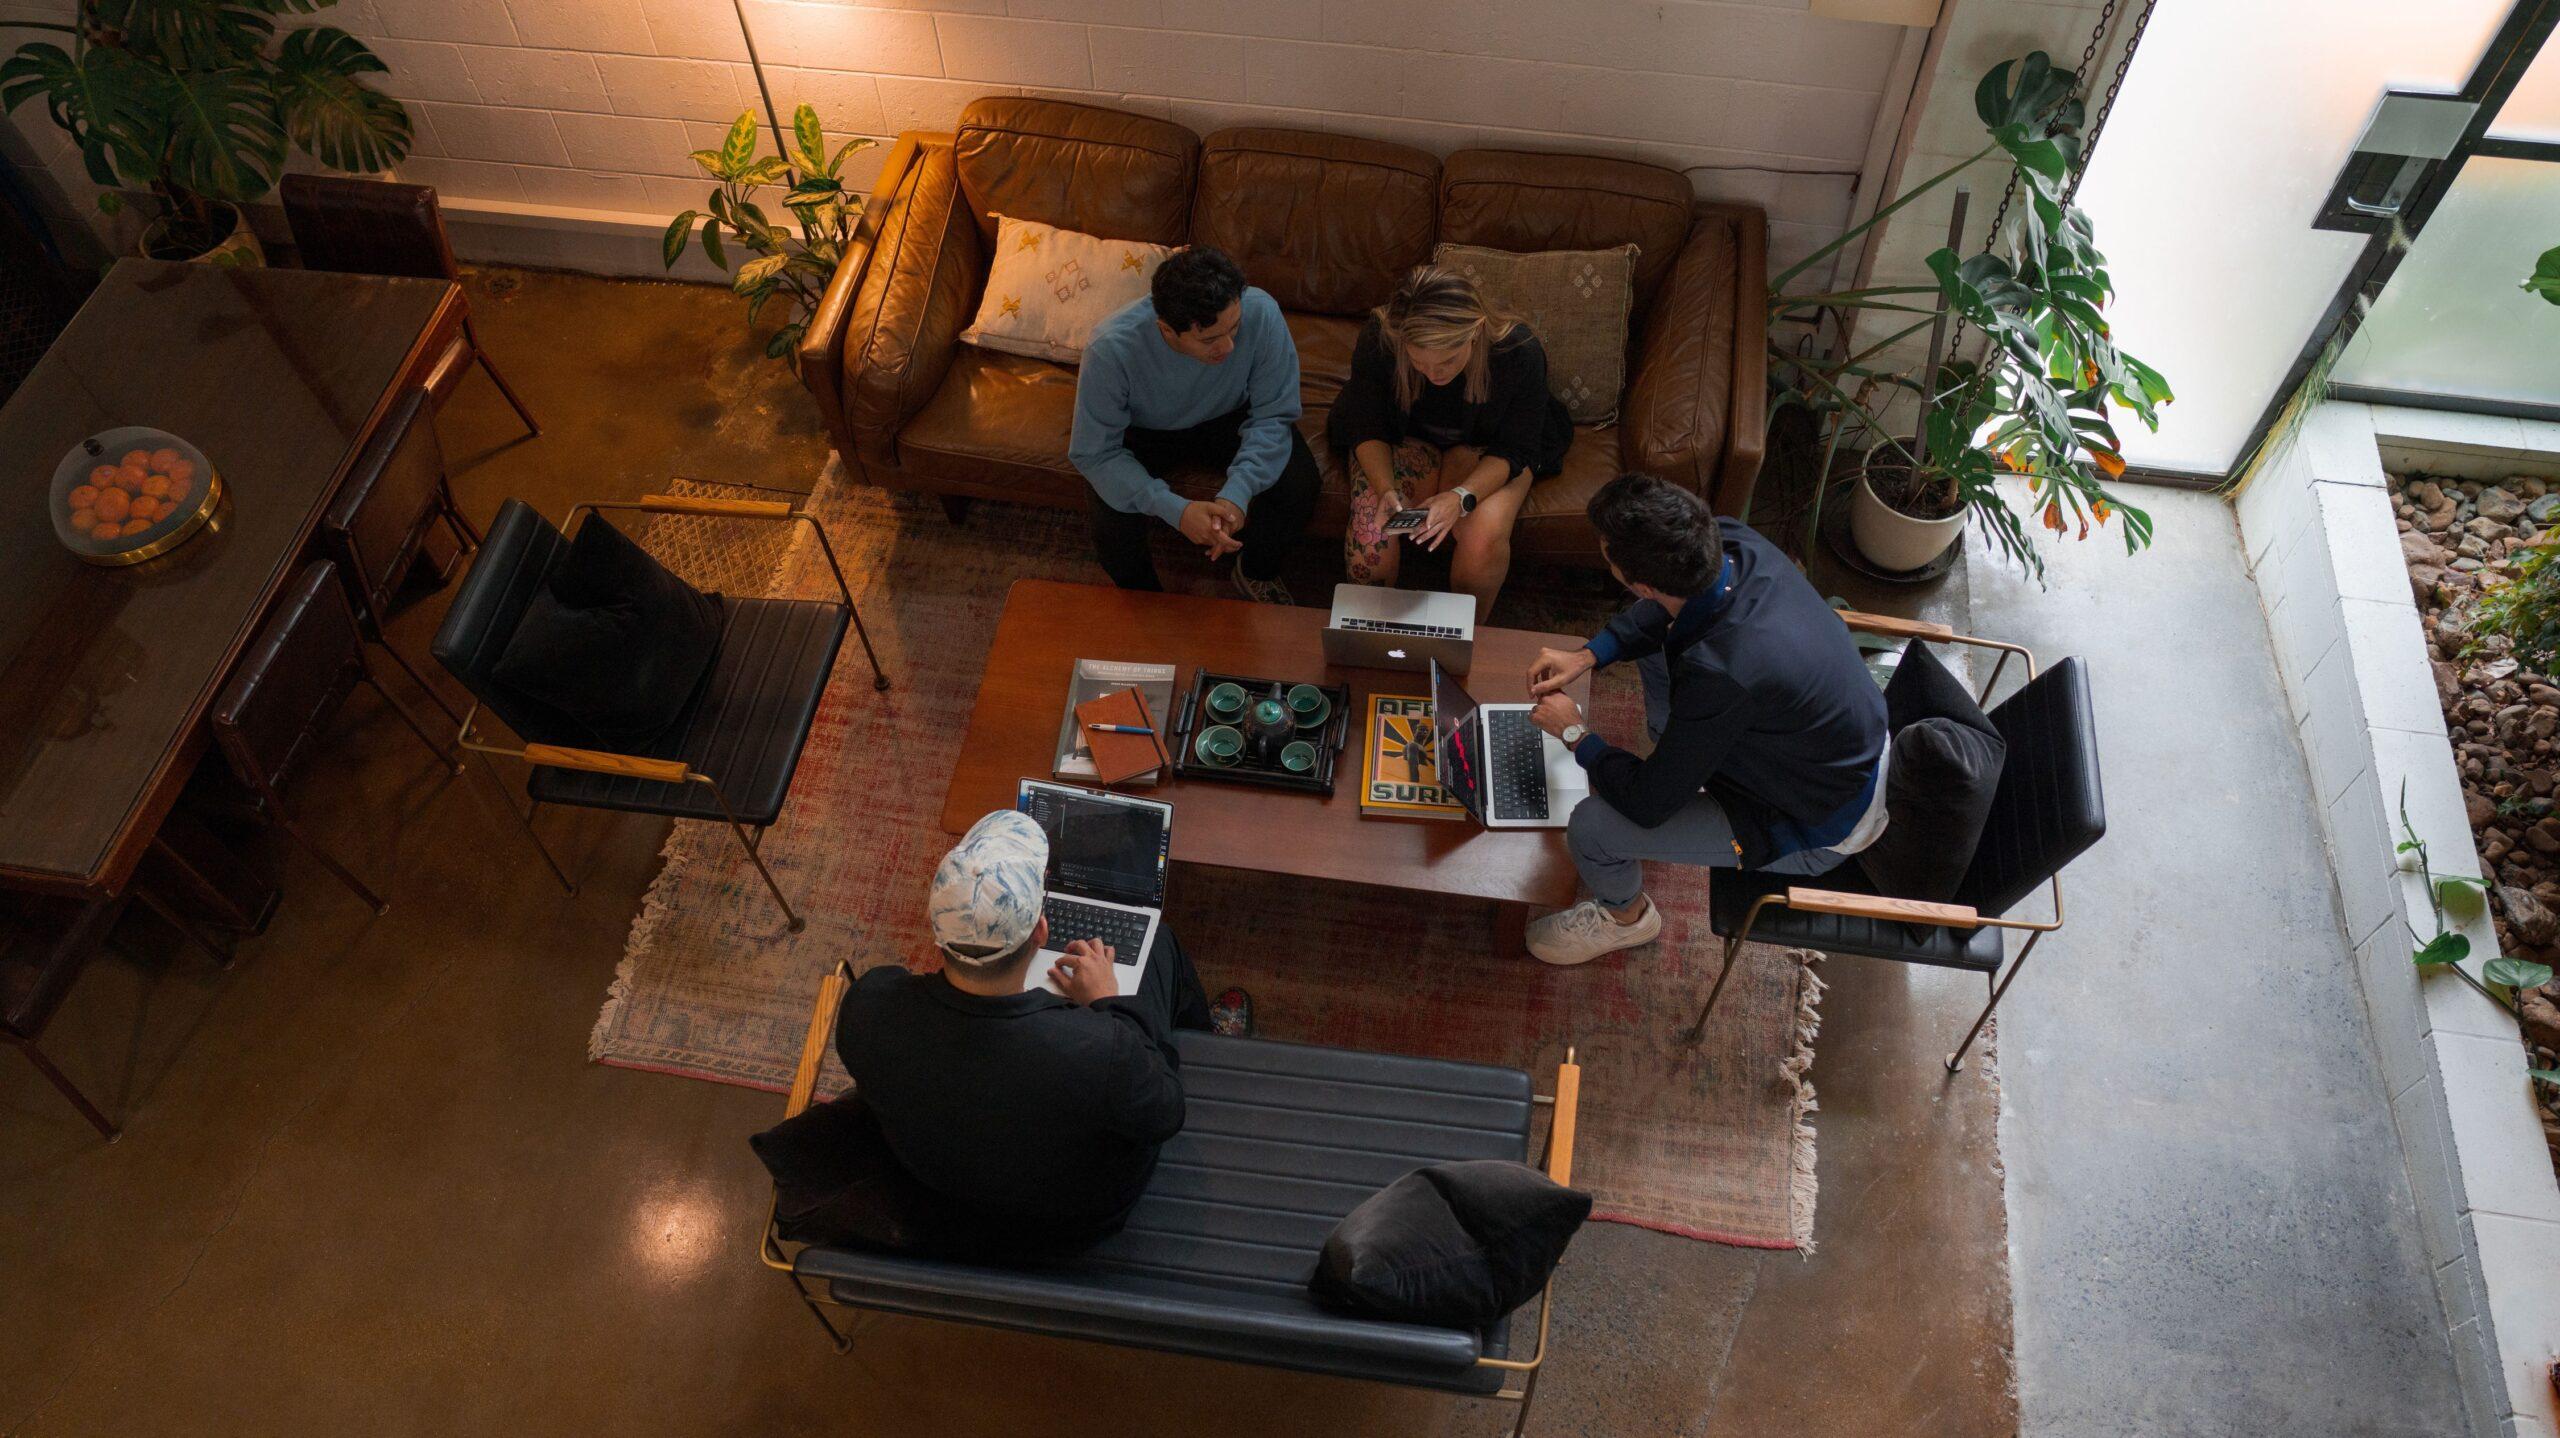 Aerial of professionals sitting on sofas and chairs interacting in an office-like environment.